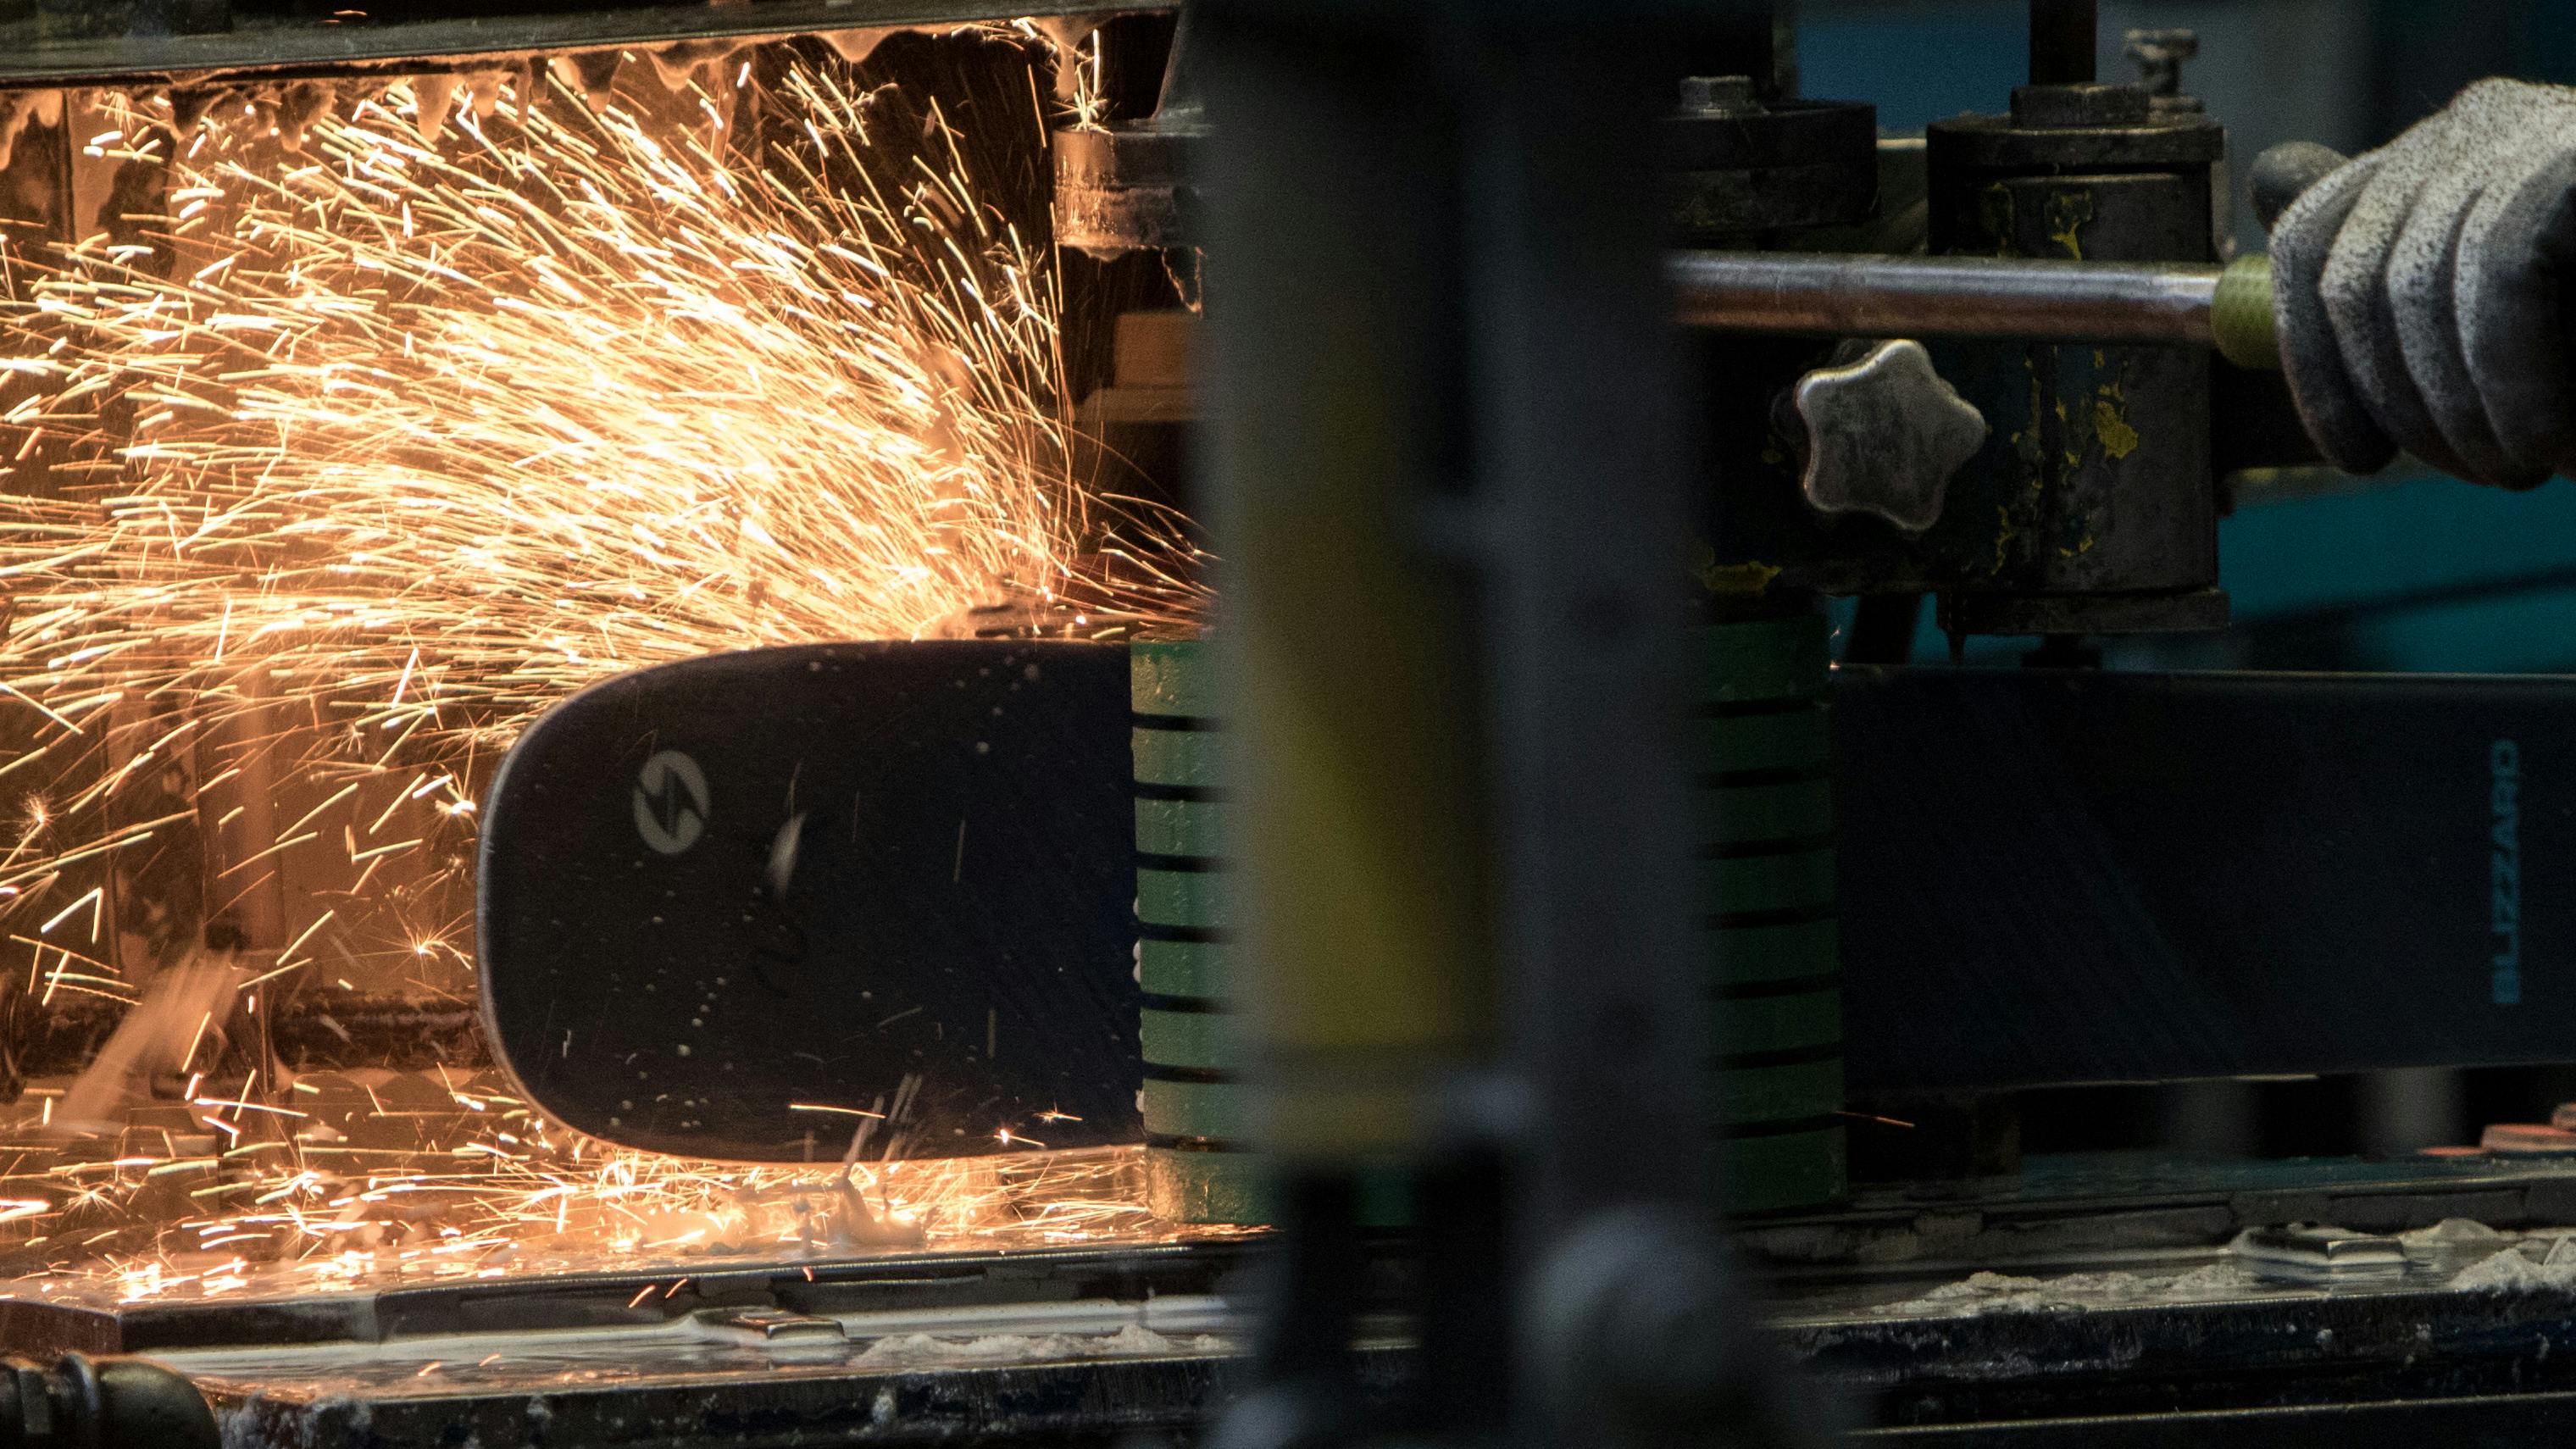 Sparks flying from a ski getting worked on in a factory